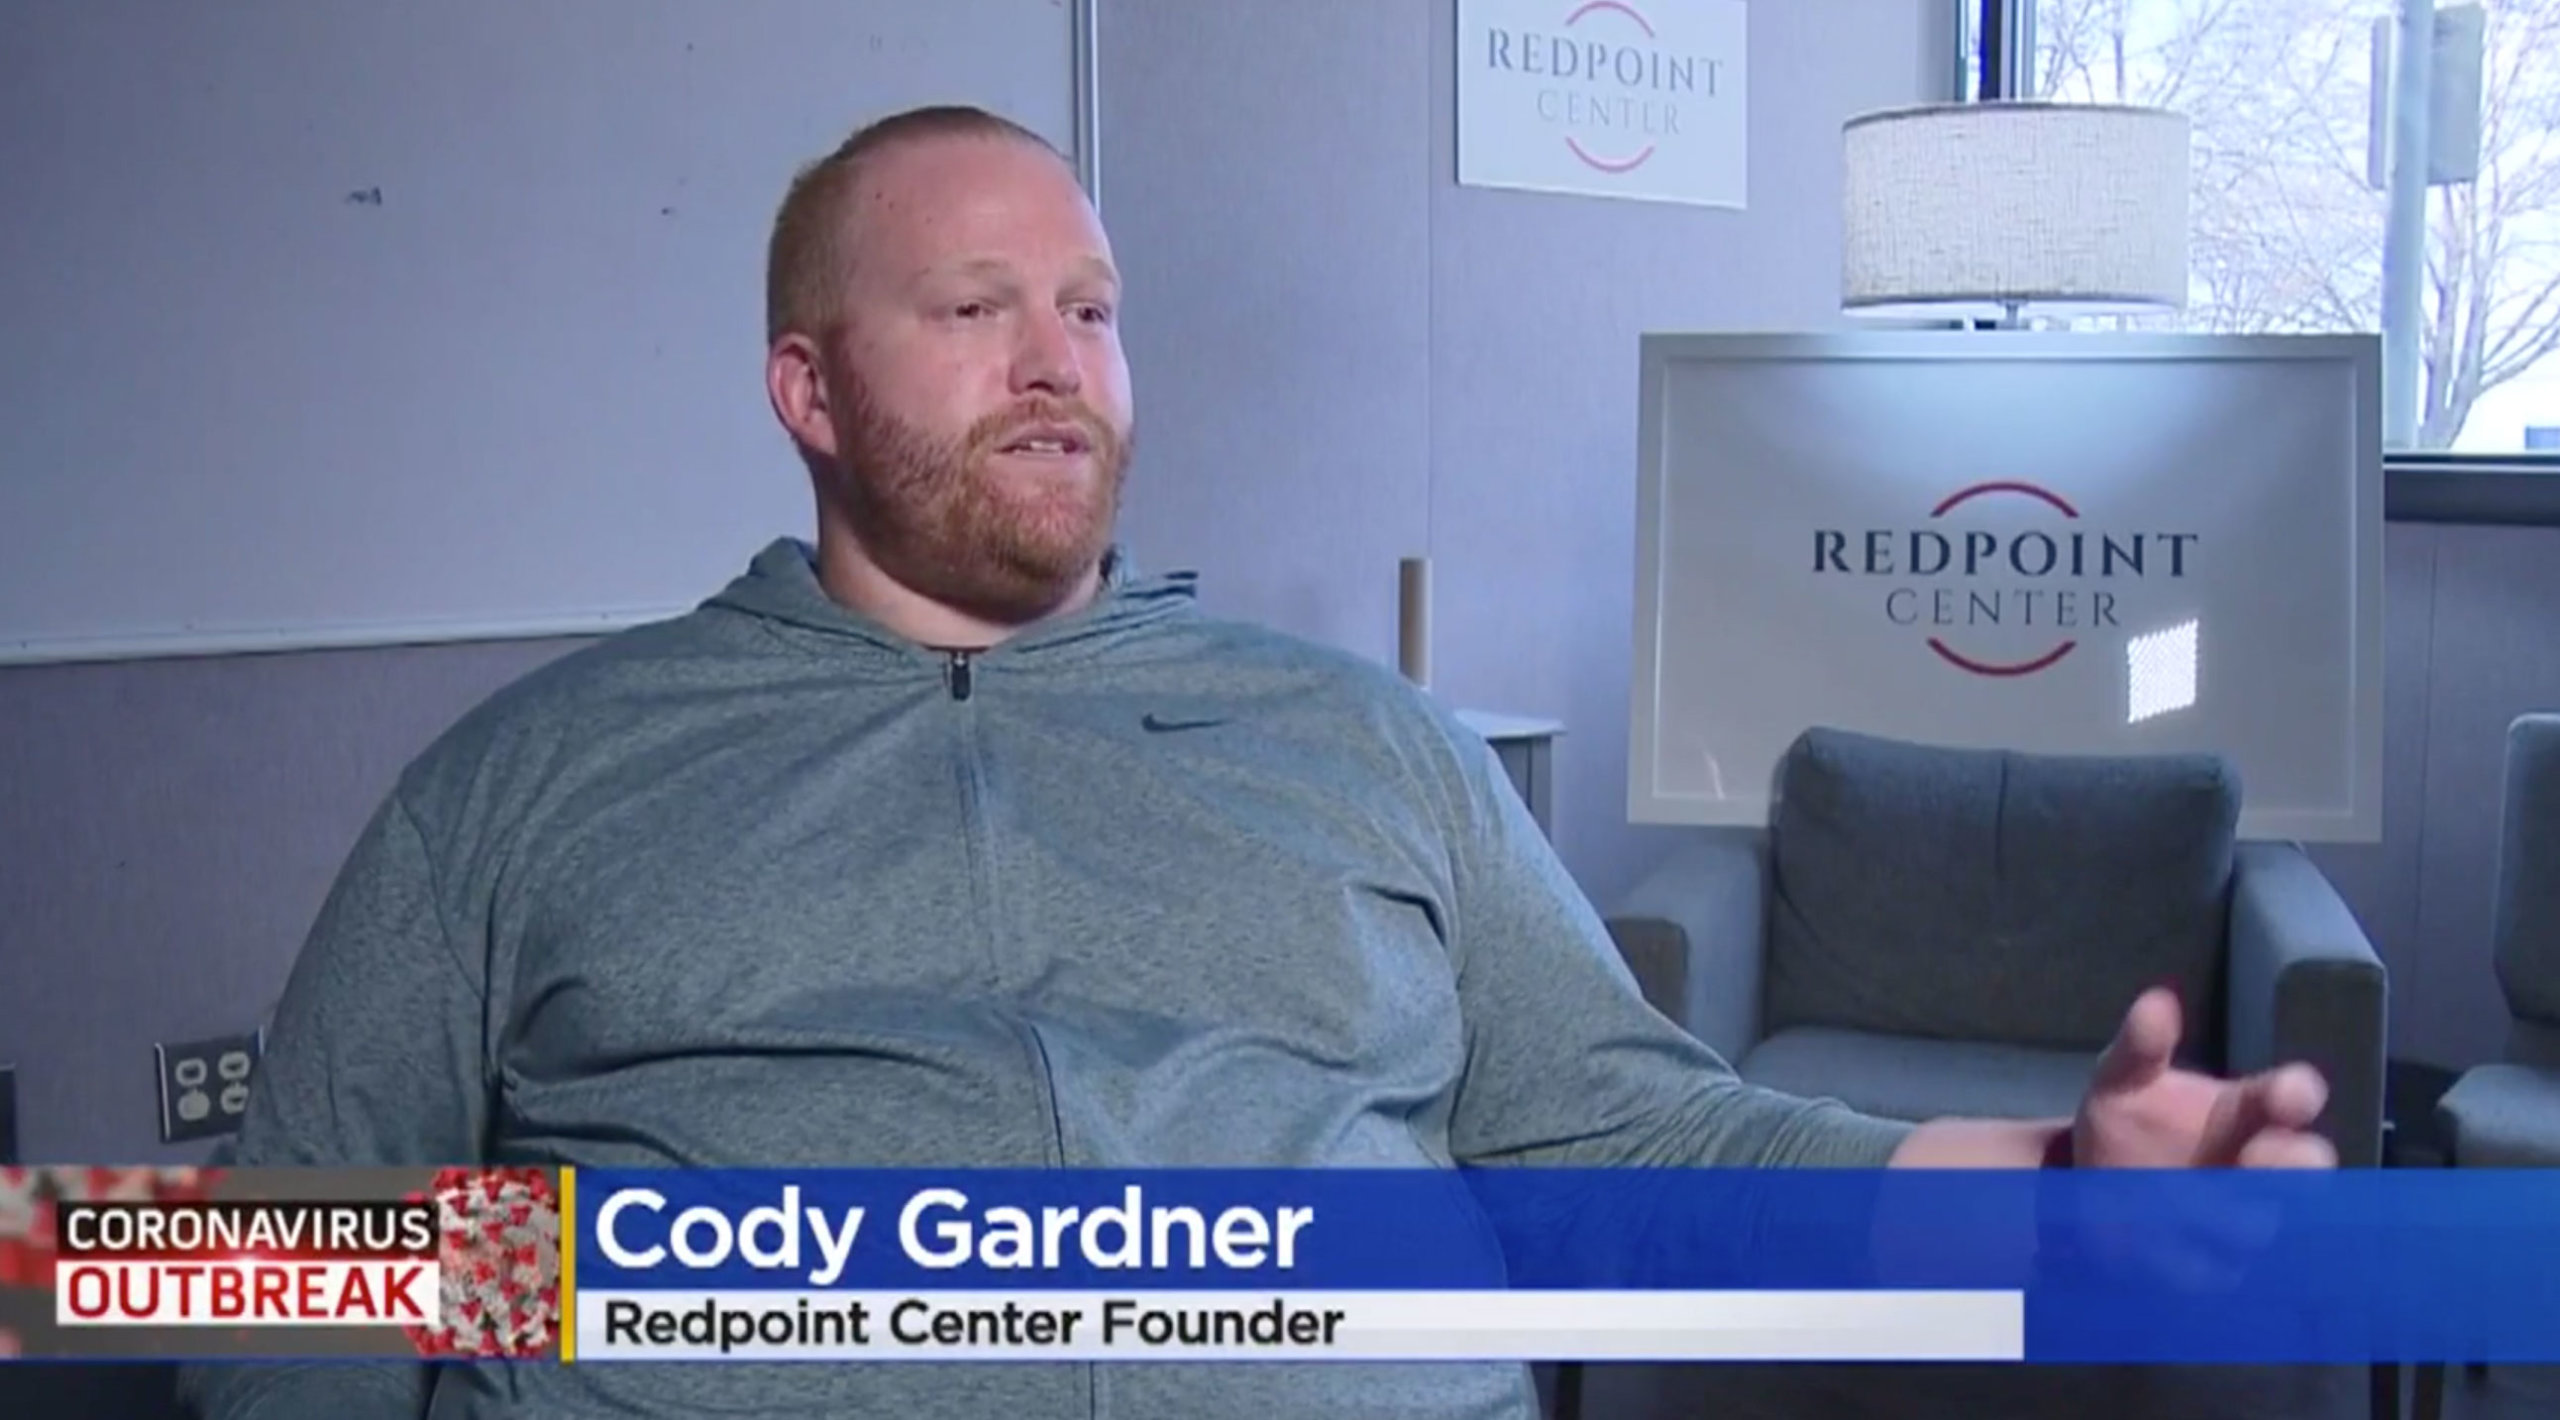 Redpoint Center Mental Health Substance Use Treatment Featured CBS4 News